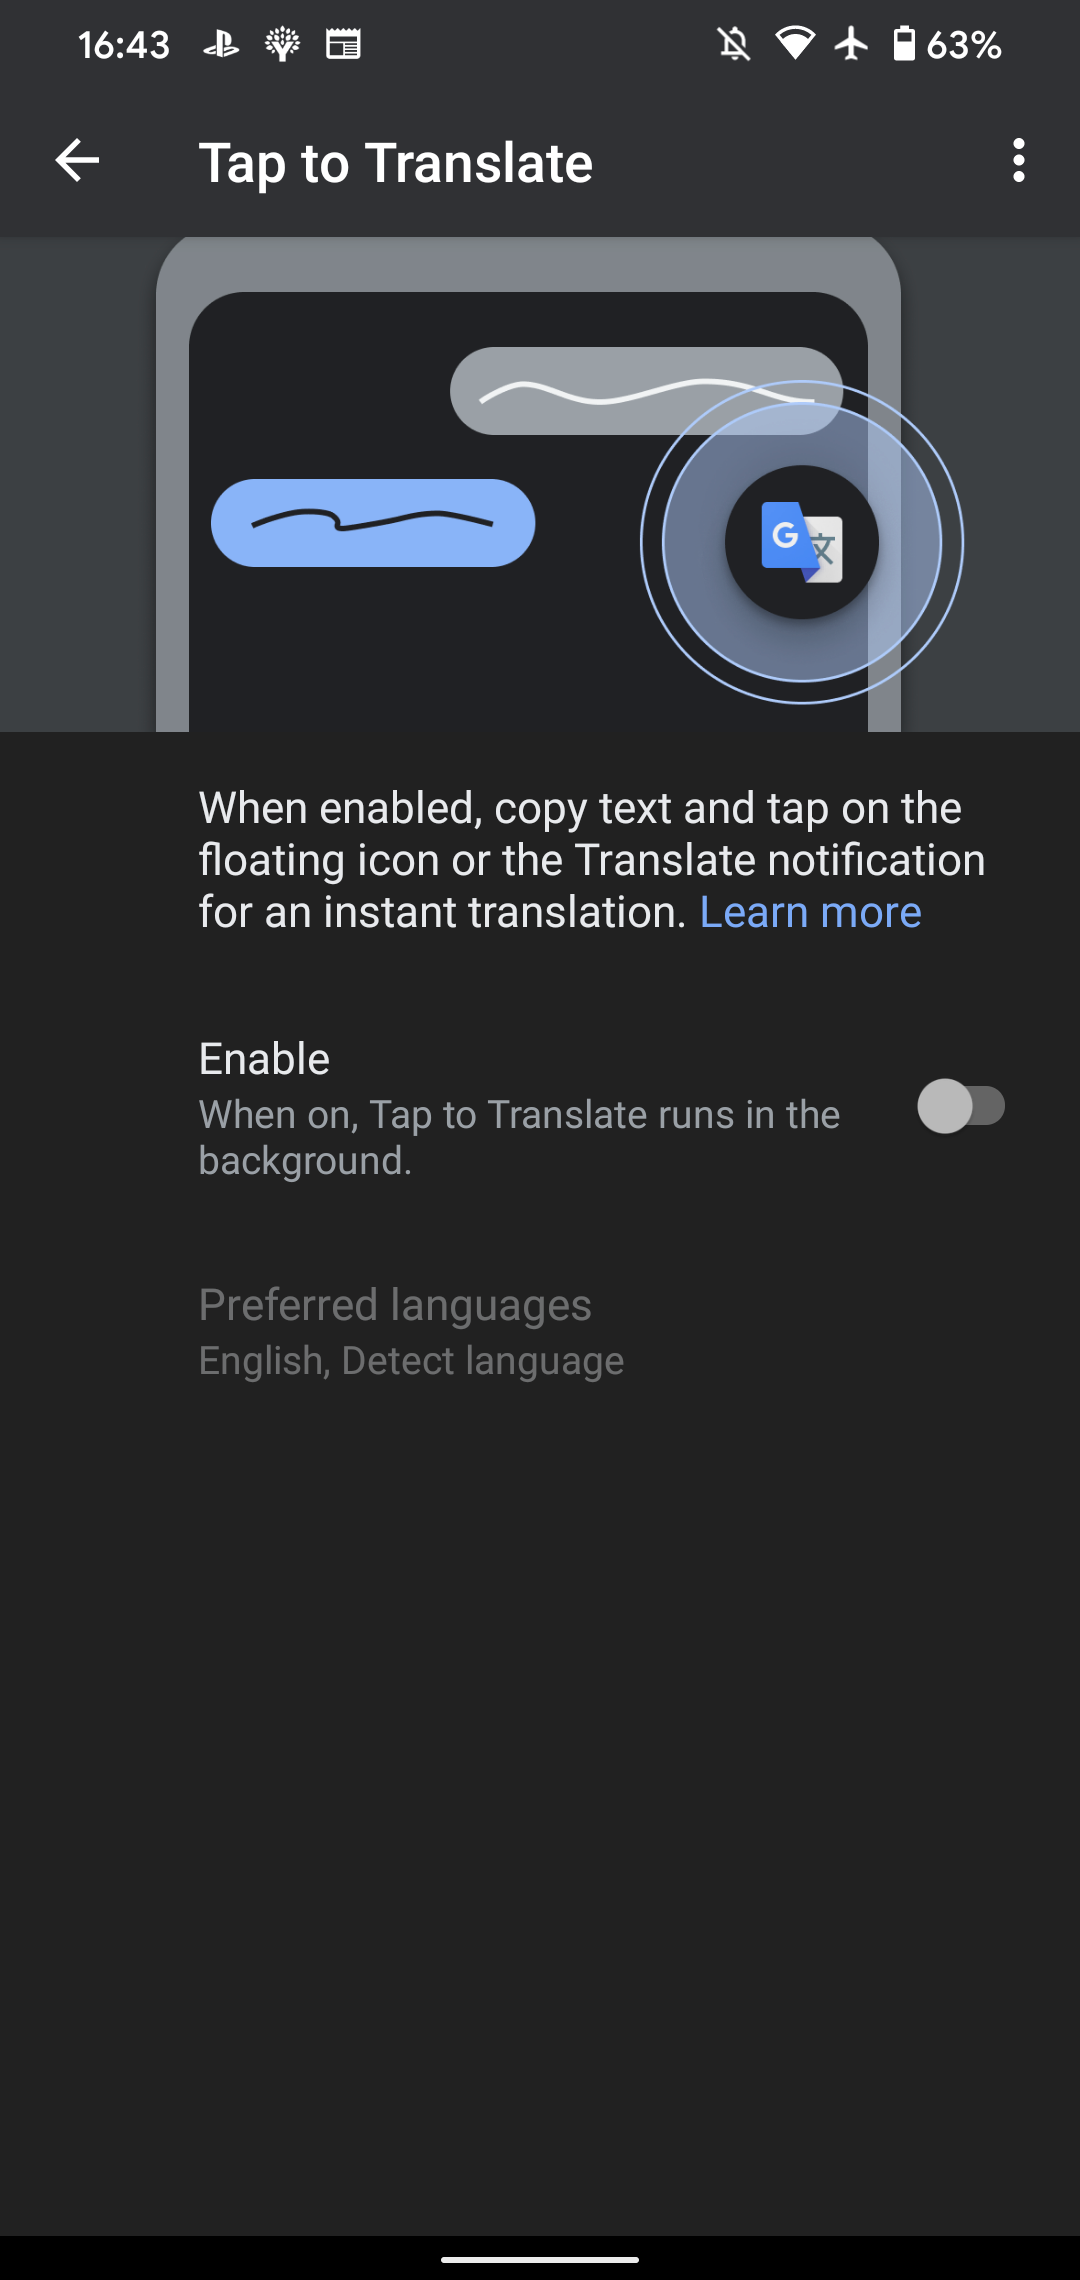 Tap to Translate Android